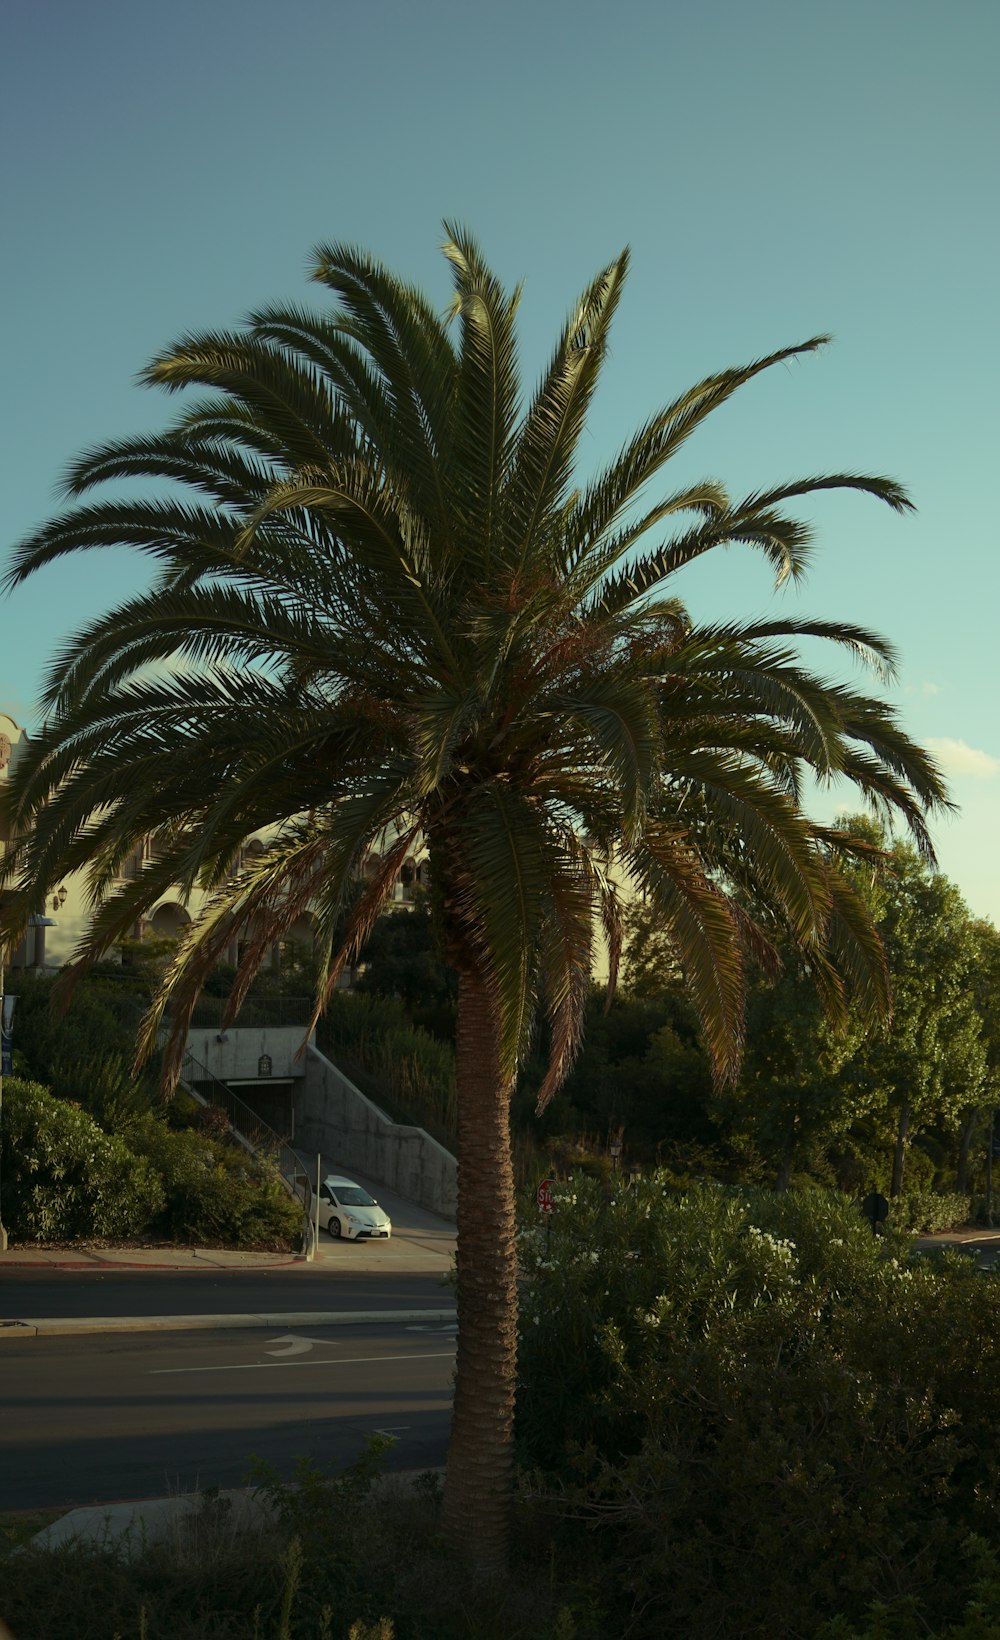 a palm tree on the side of the road